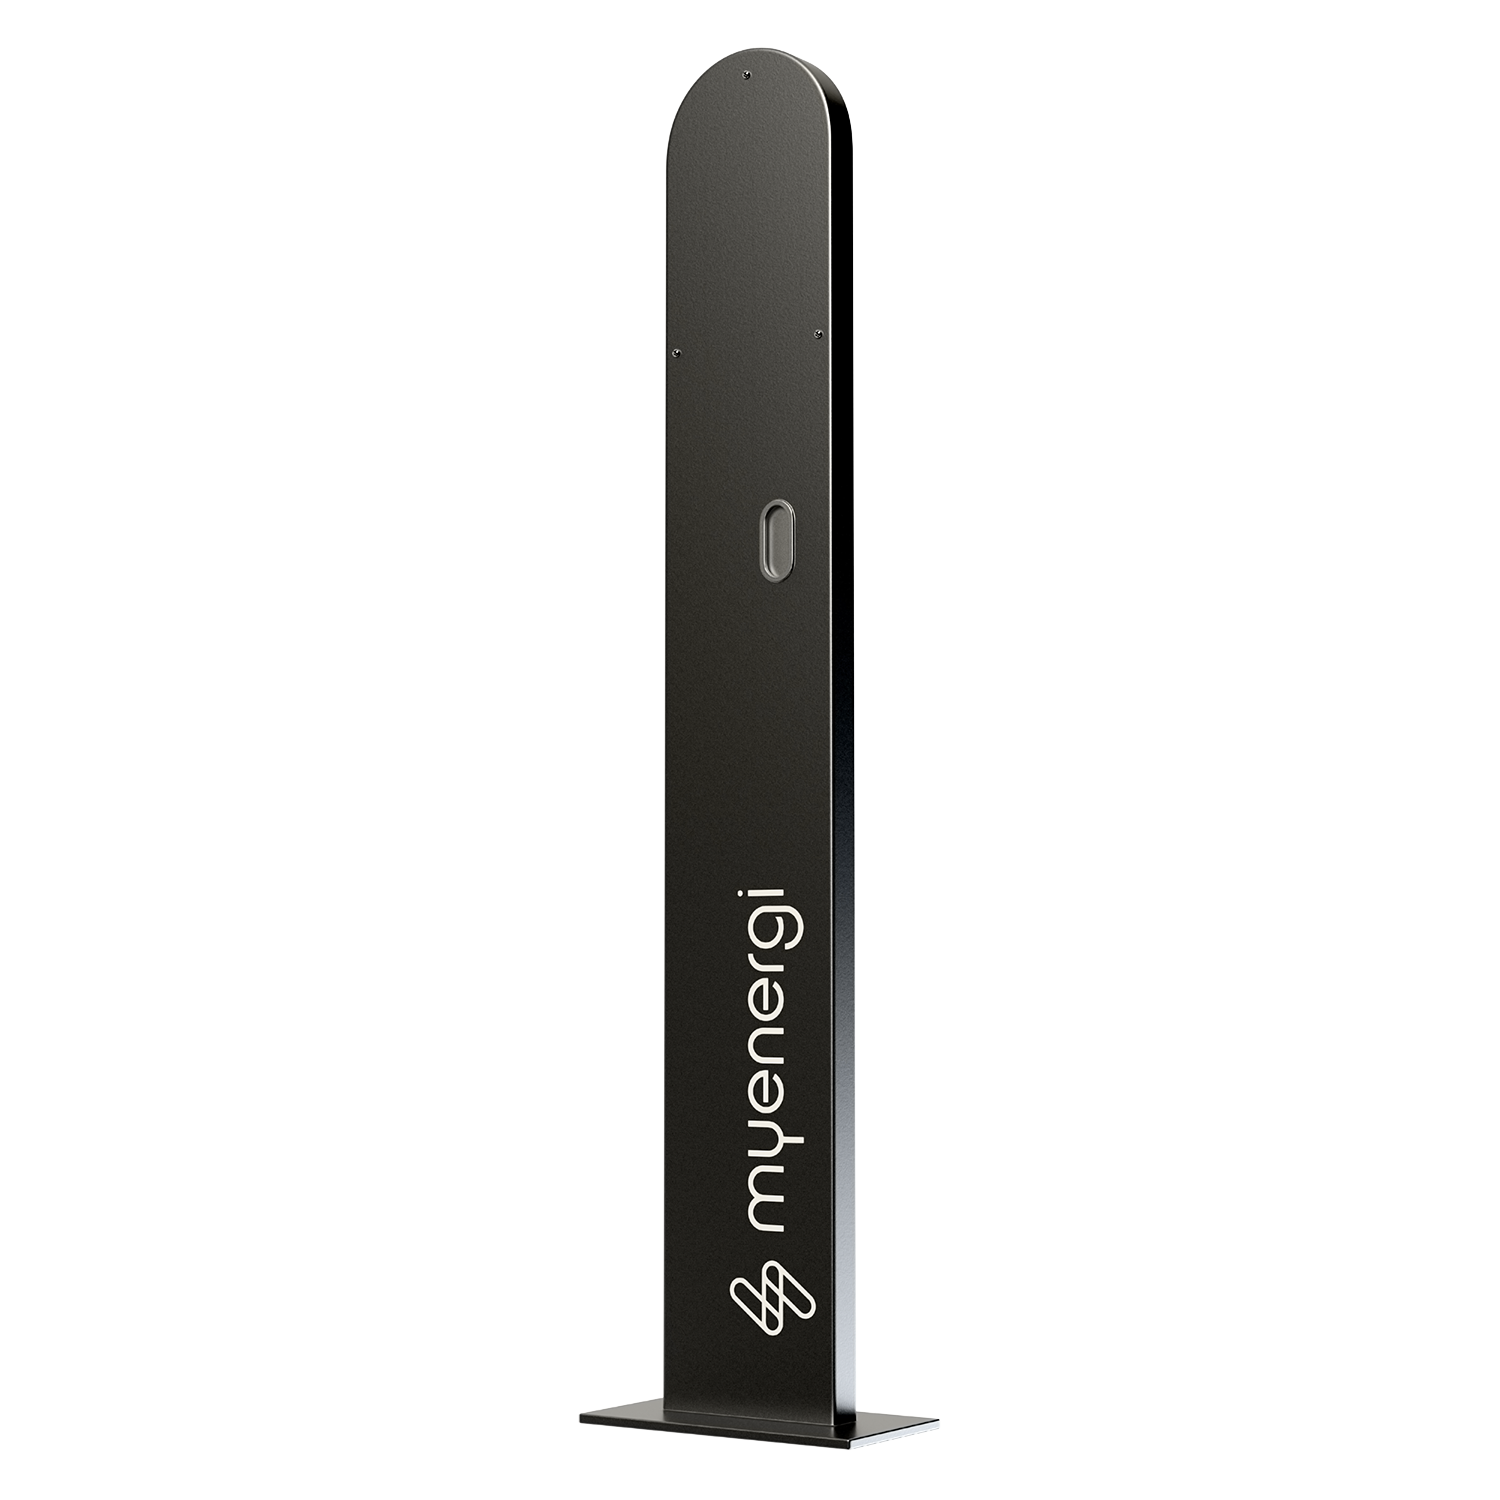 Zappi Pedestal for mounting up to 2 Zappi Gen 2